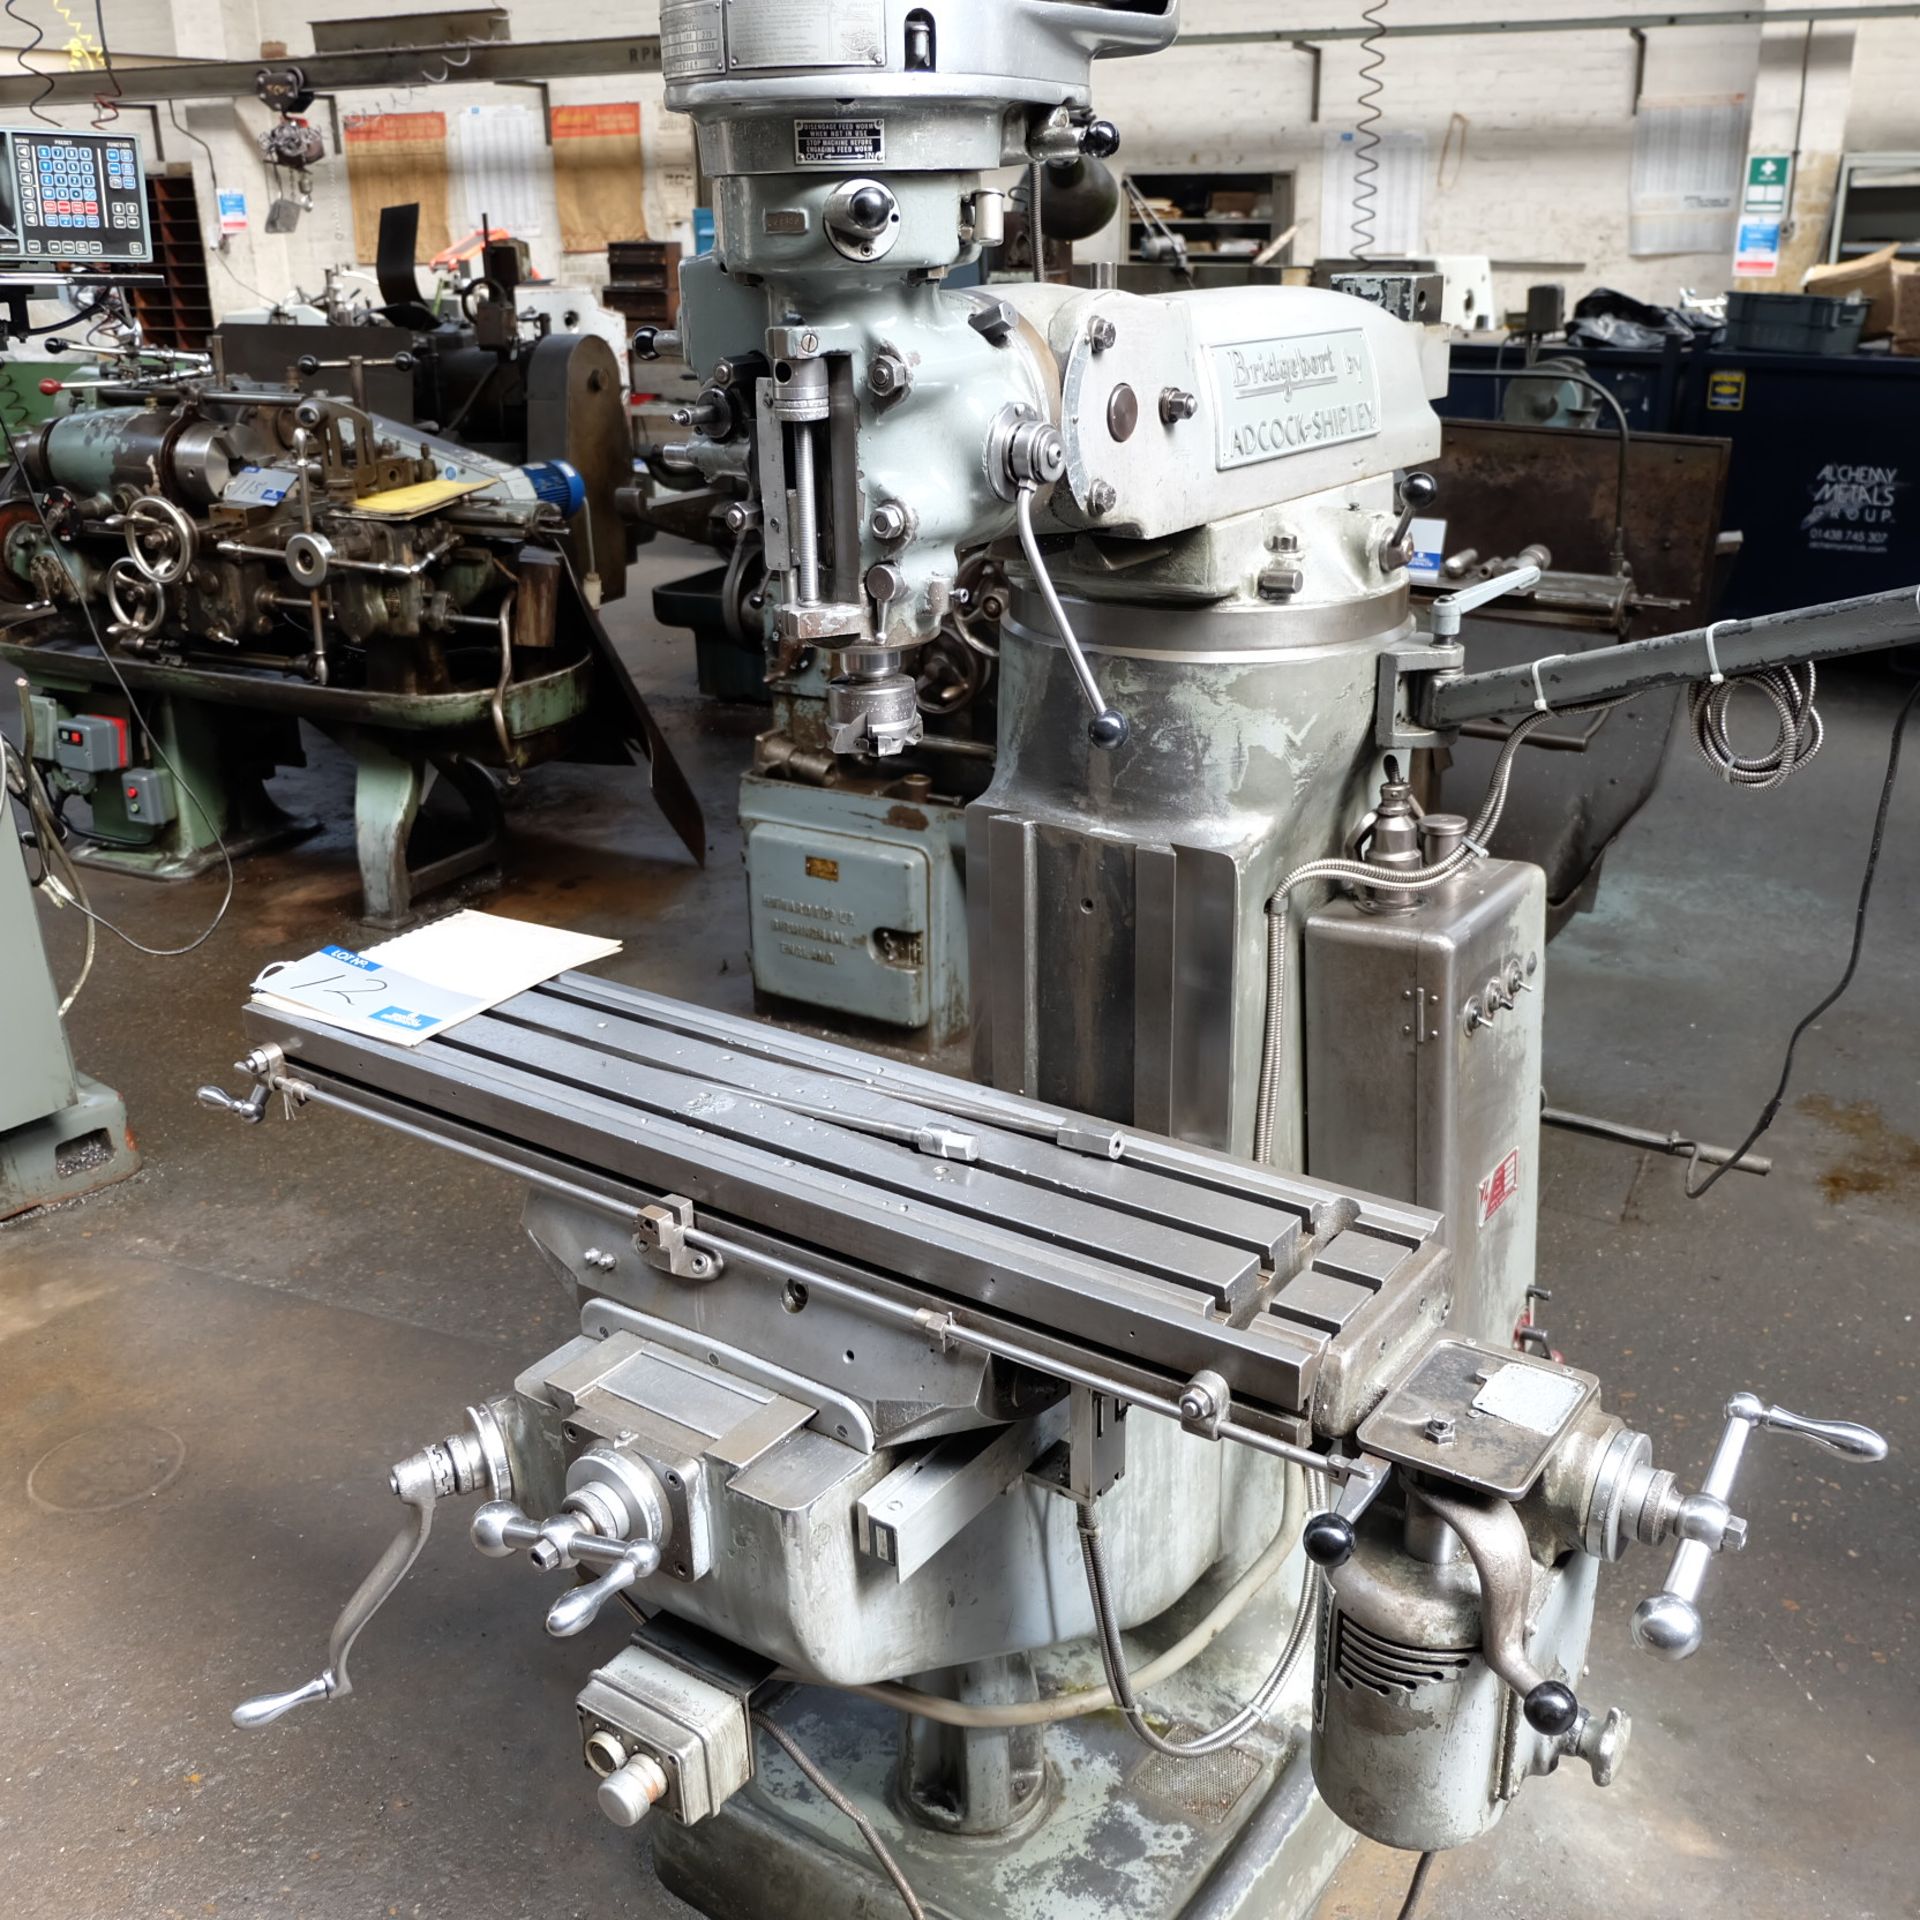 A Bridgeport BRJ Vertical Turret Head Milling Machine, 42in x 9in table with Mitutoyo 2 axis Digital - Image 4 of 5